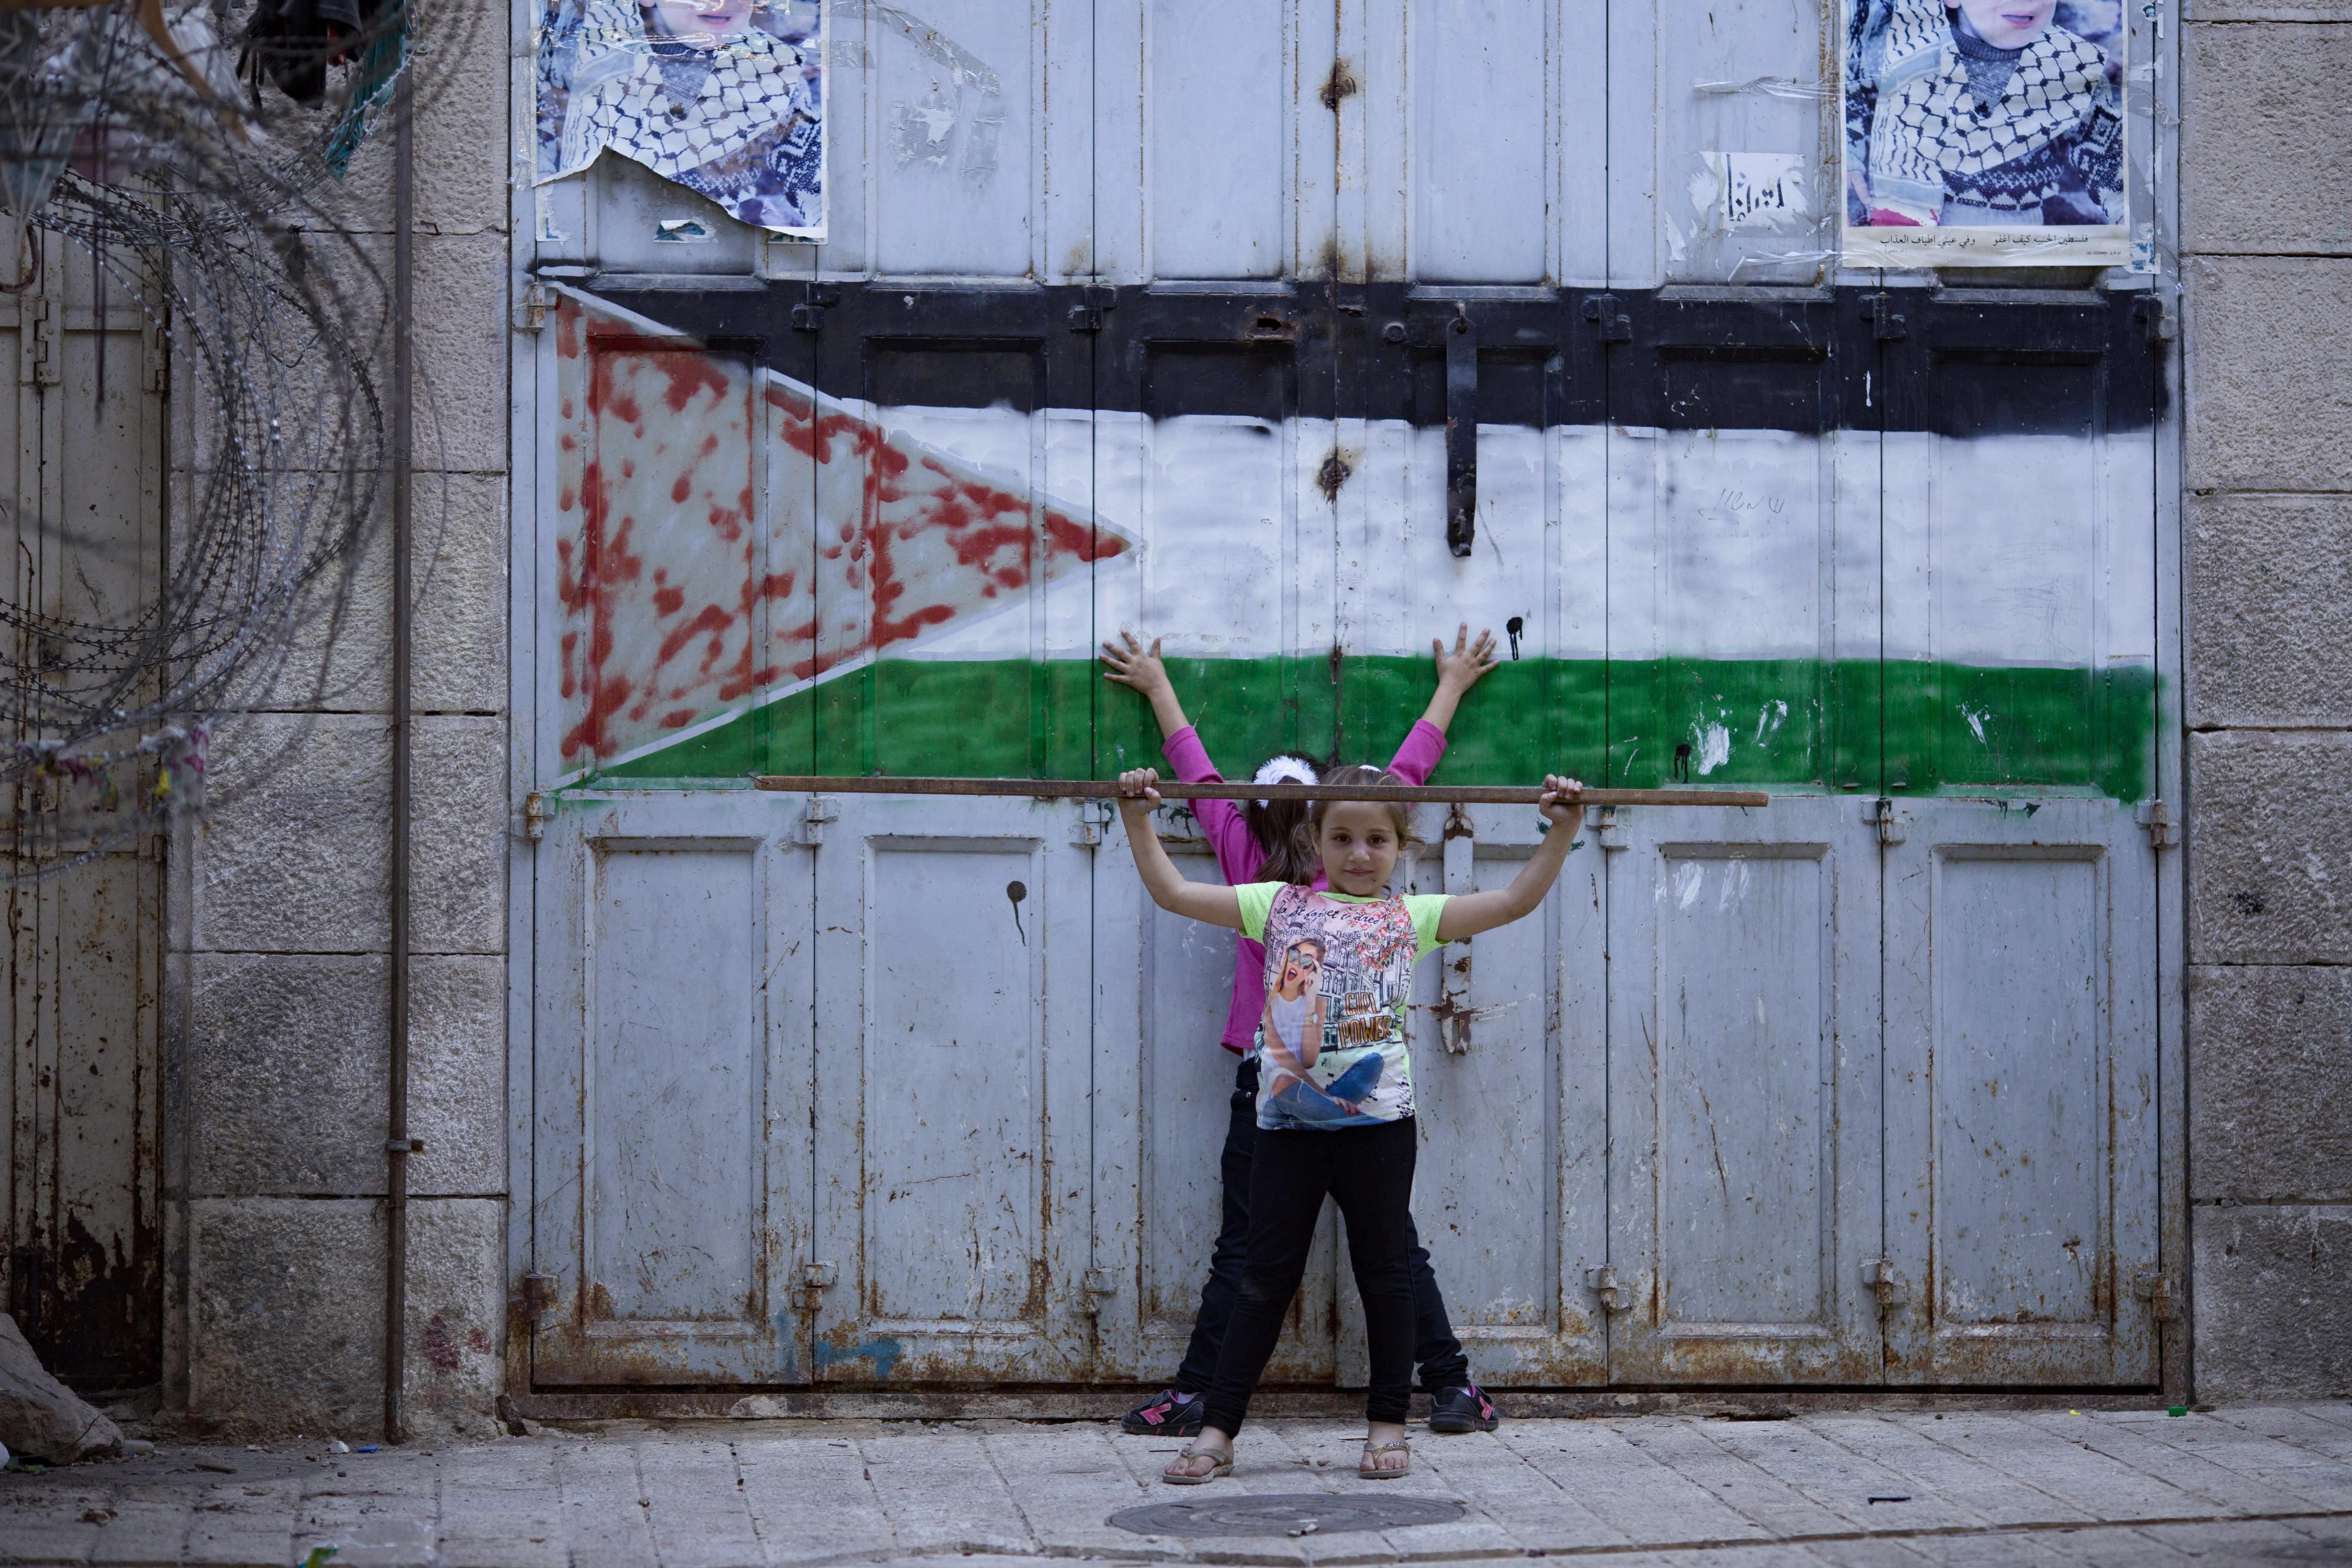 Two Palestinian children pose next to their flag in the closed market area of Hebron. 